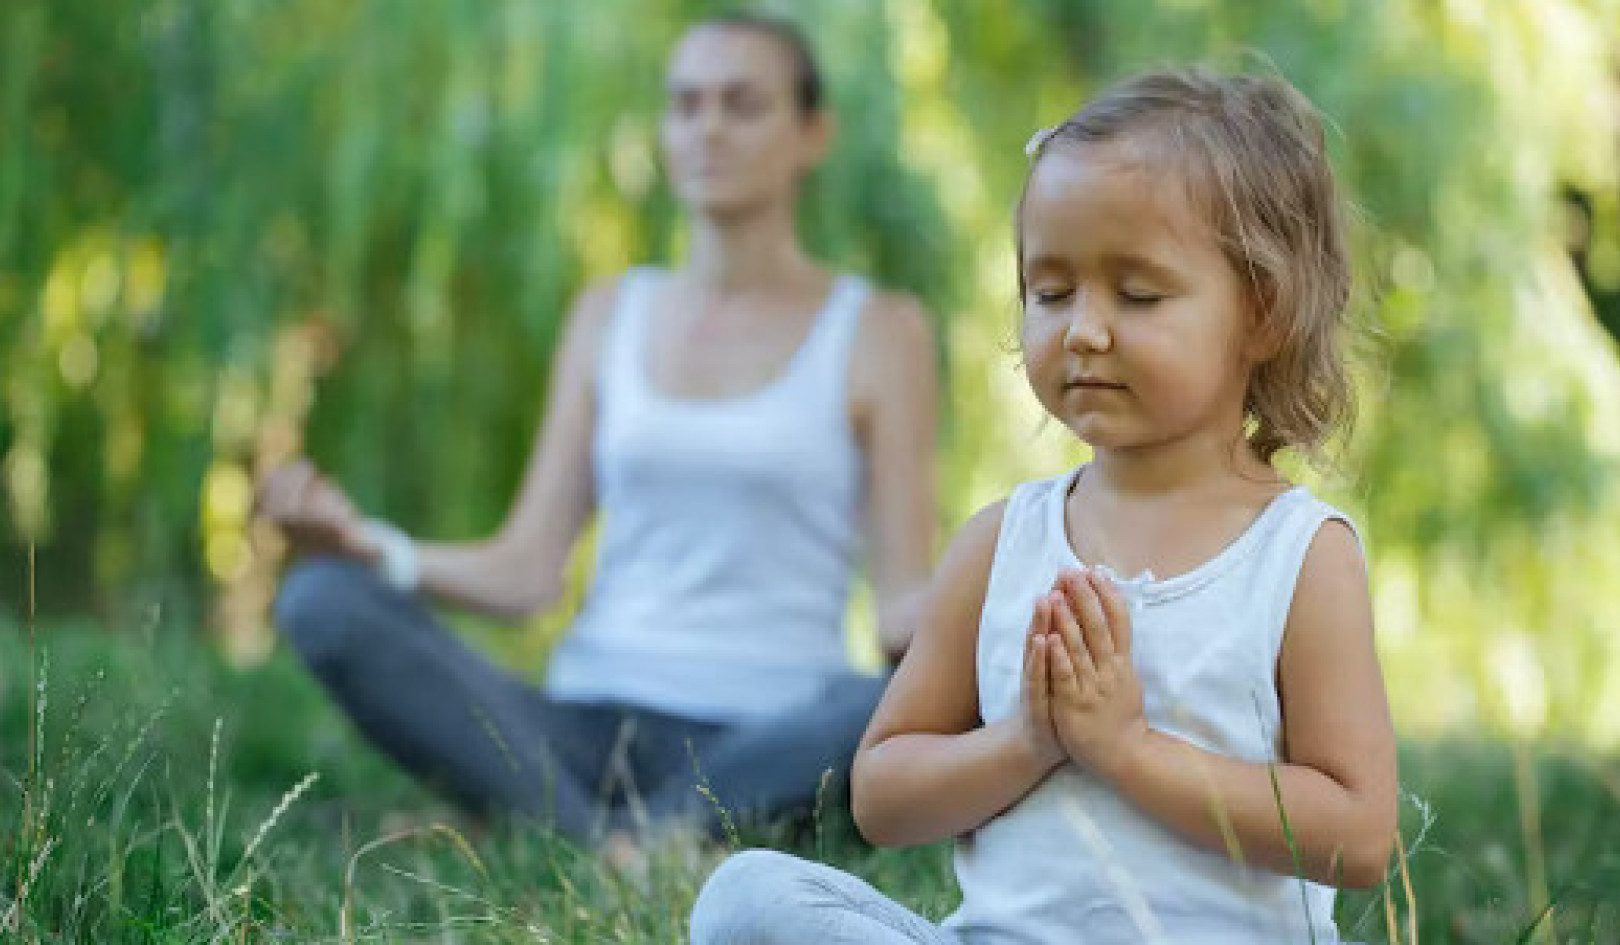 Meditation Has Potential To Treat Children Suffering From Traumas, Difficult Diagnoses Or Stress